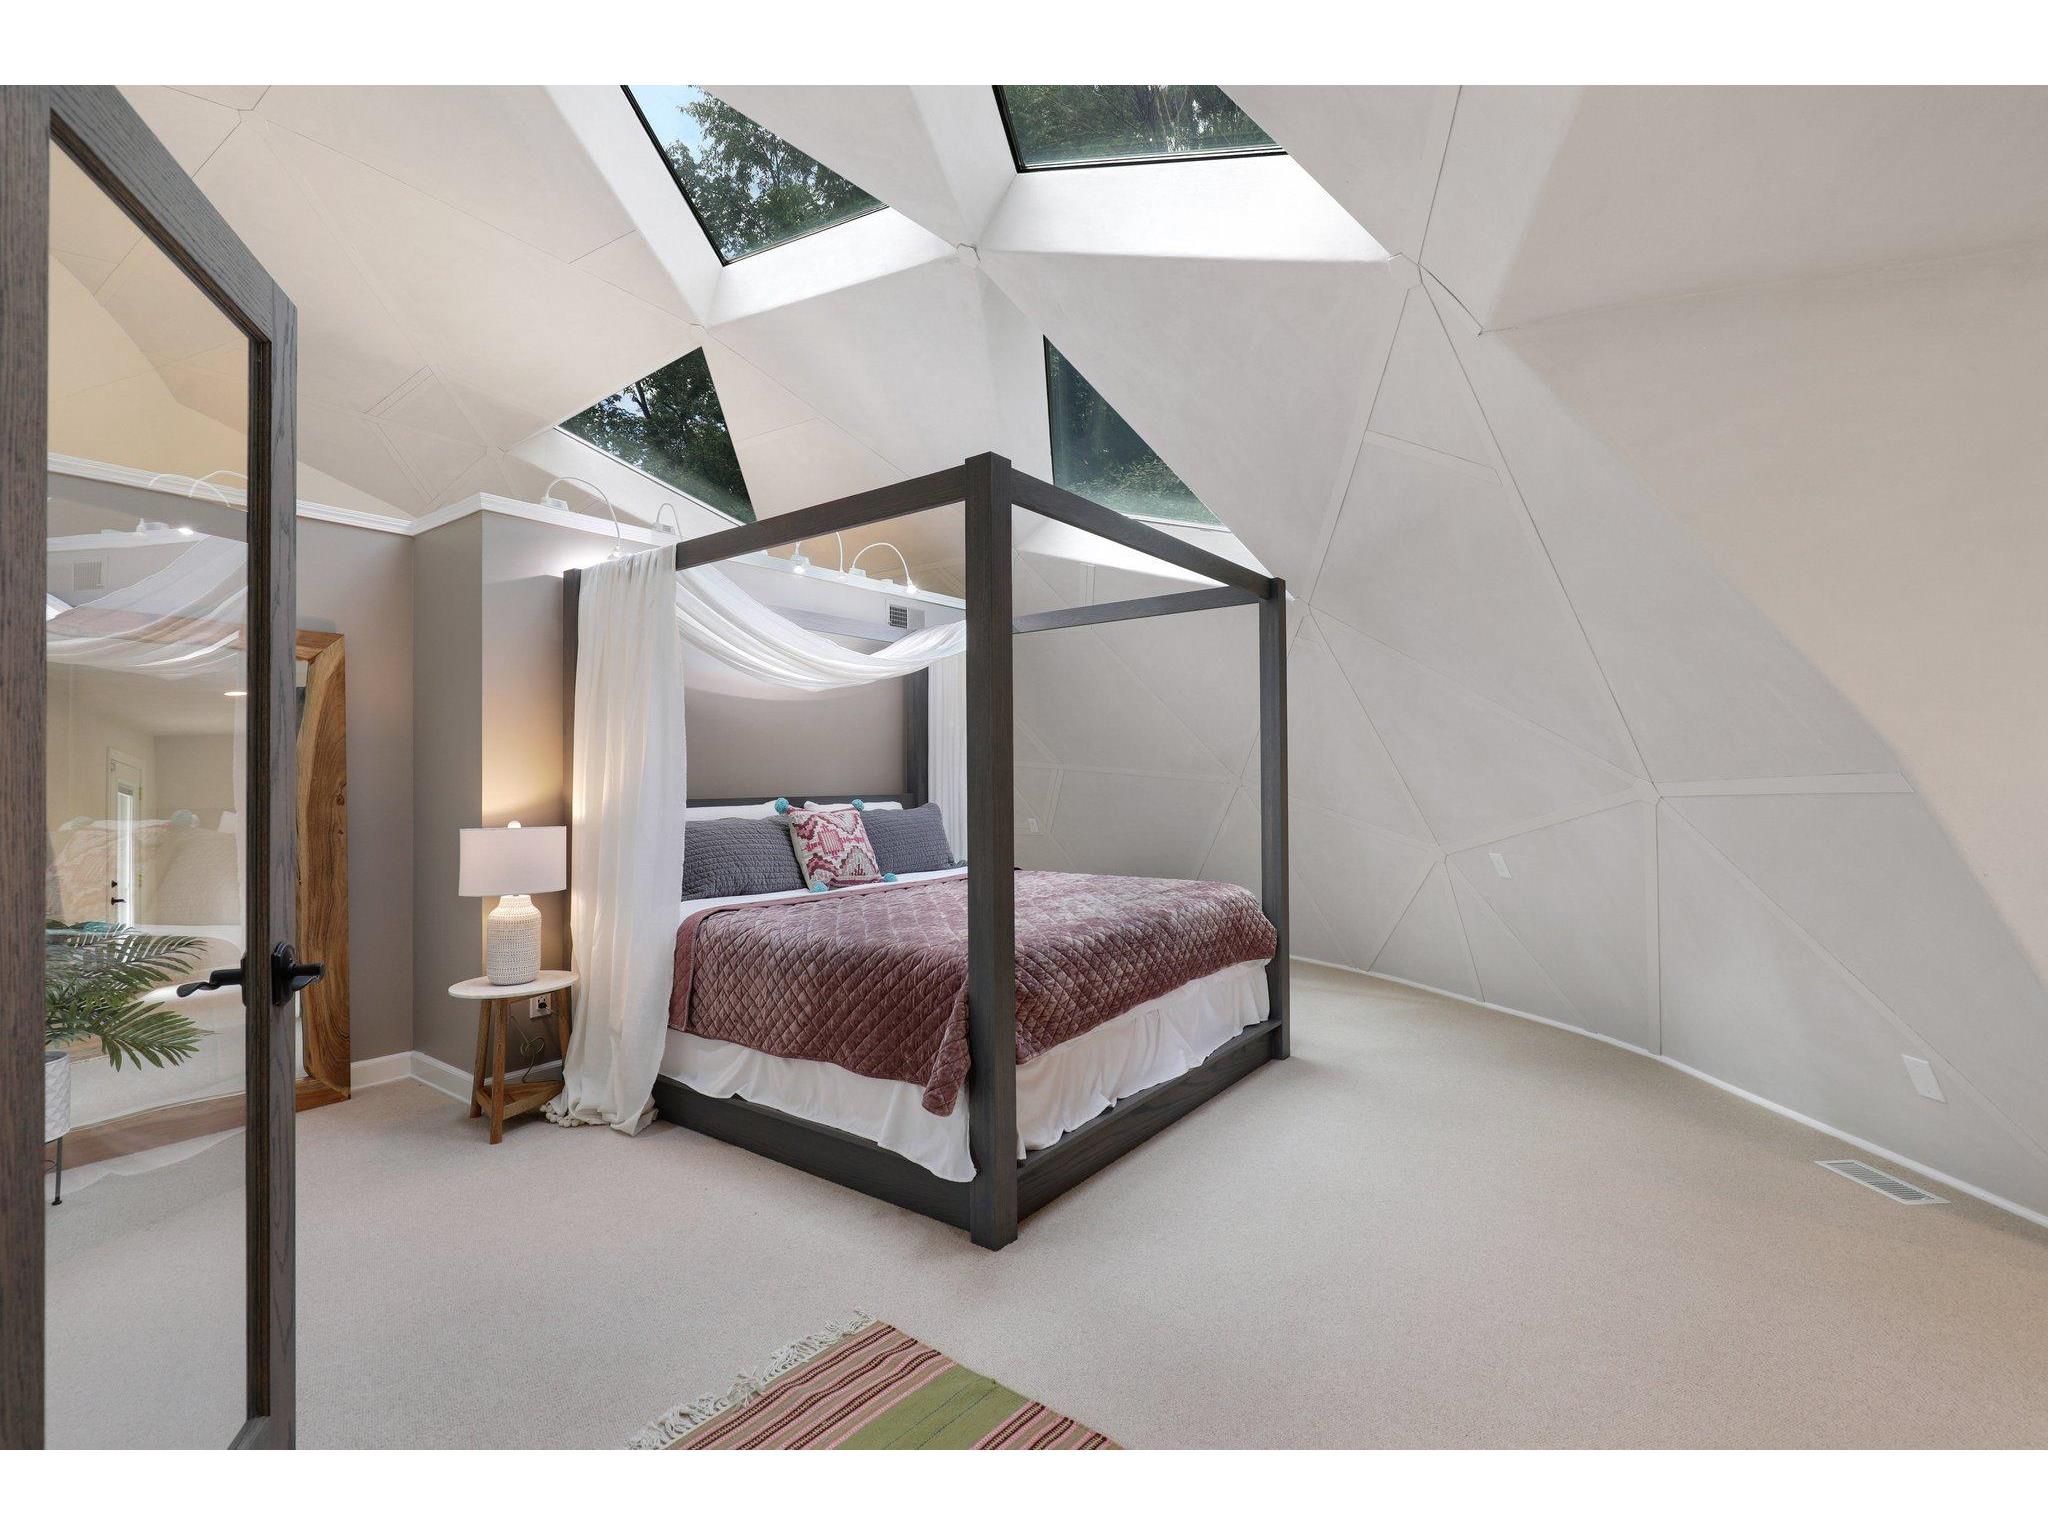 Master bedroom with triangle shaped windows